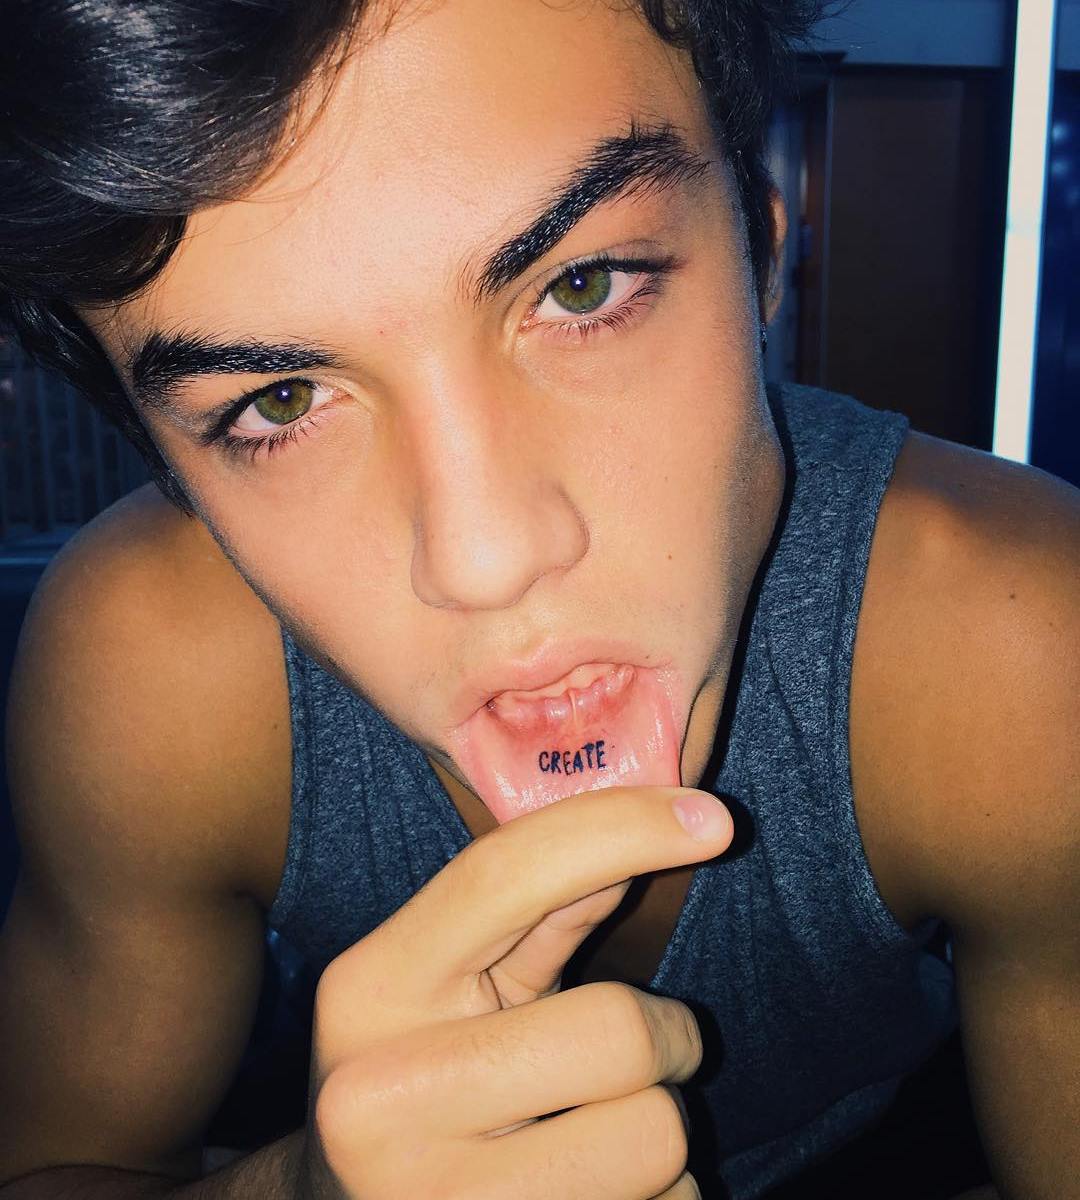 Does Ethan Dolan Have A Tattoo On His Lip